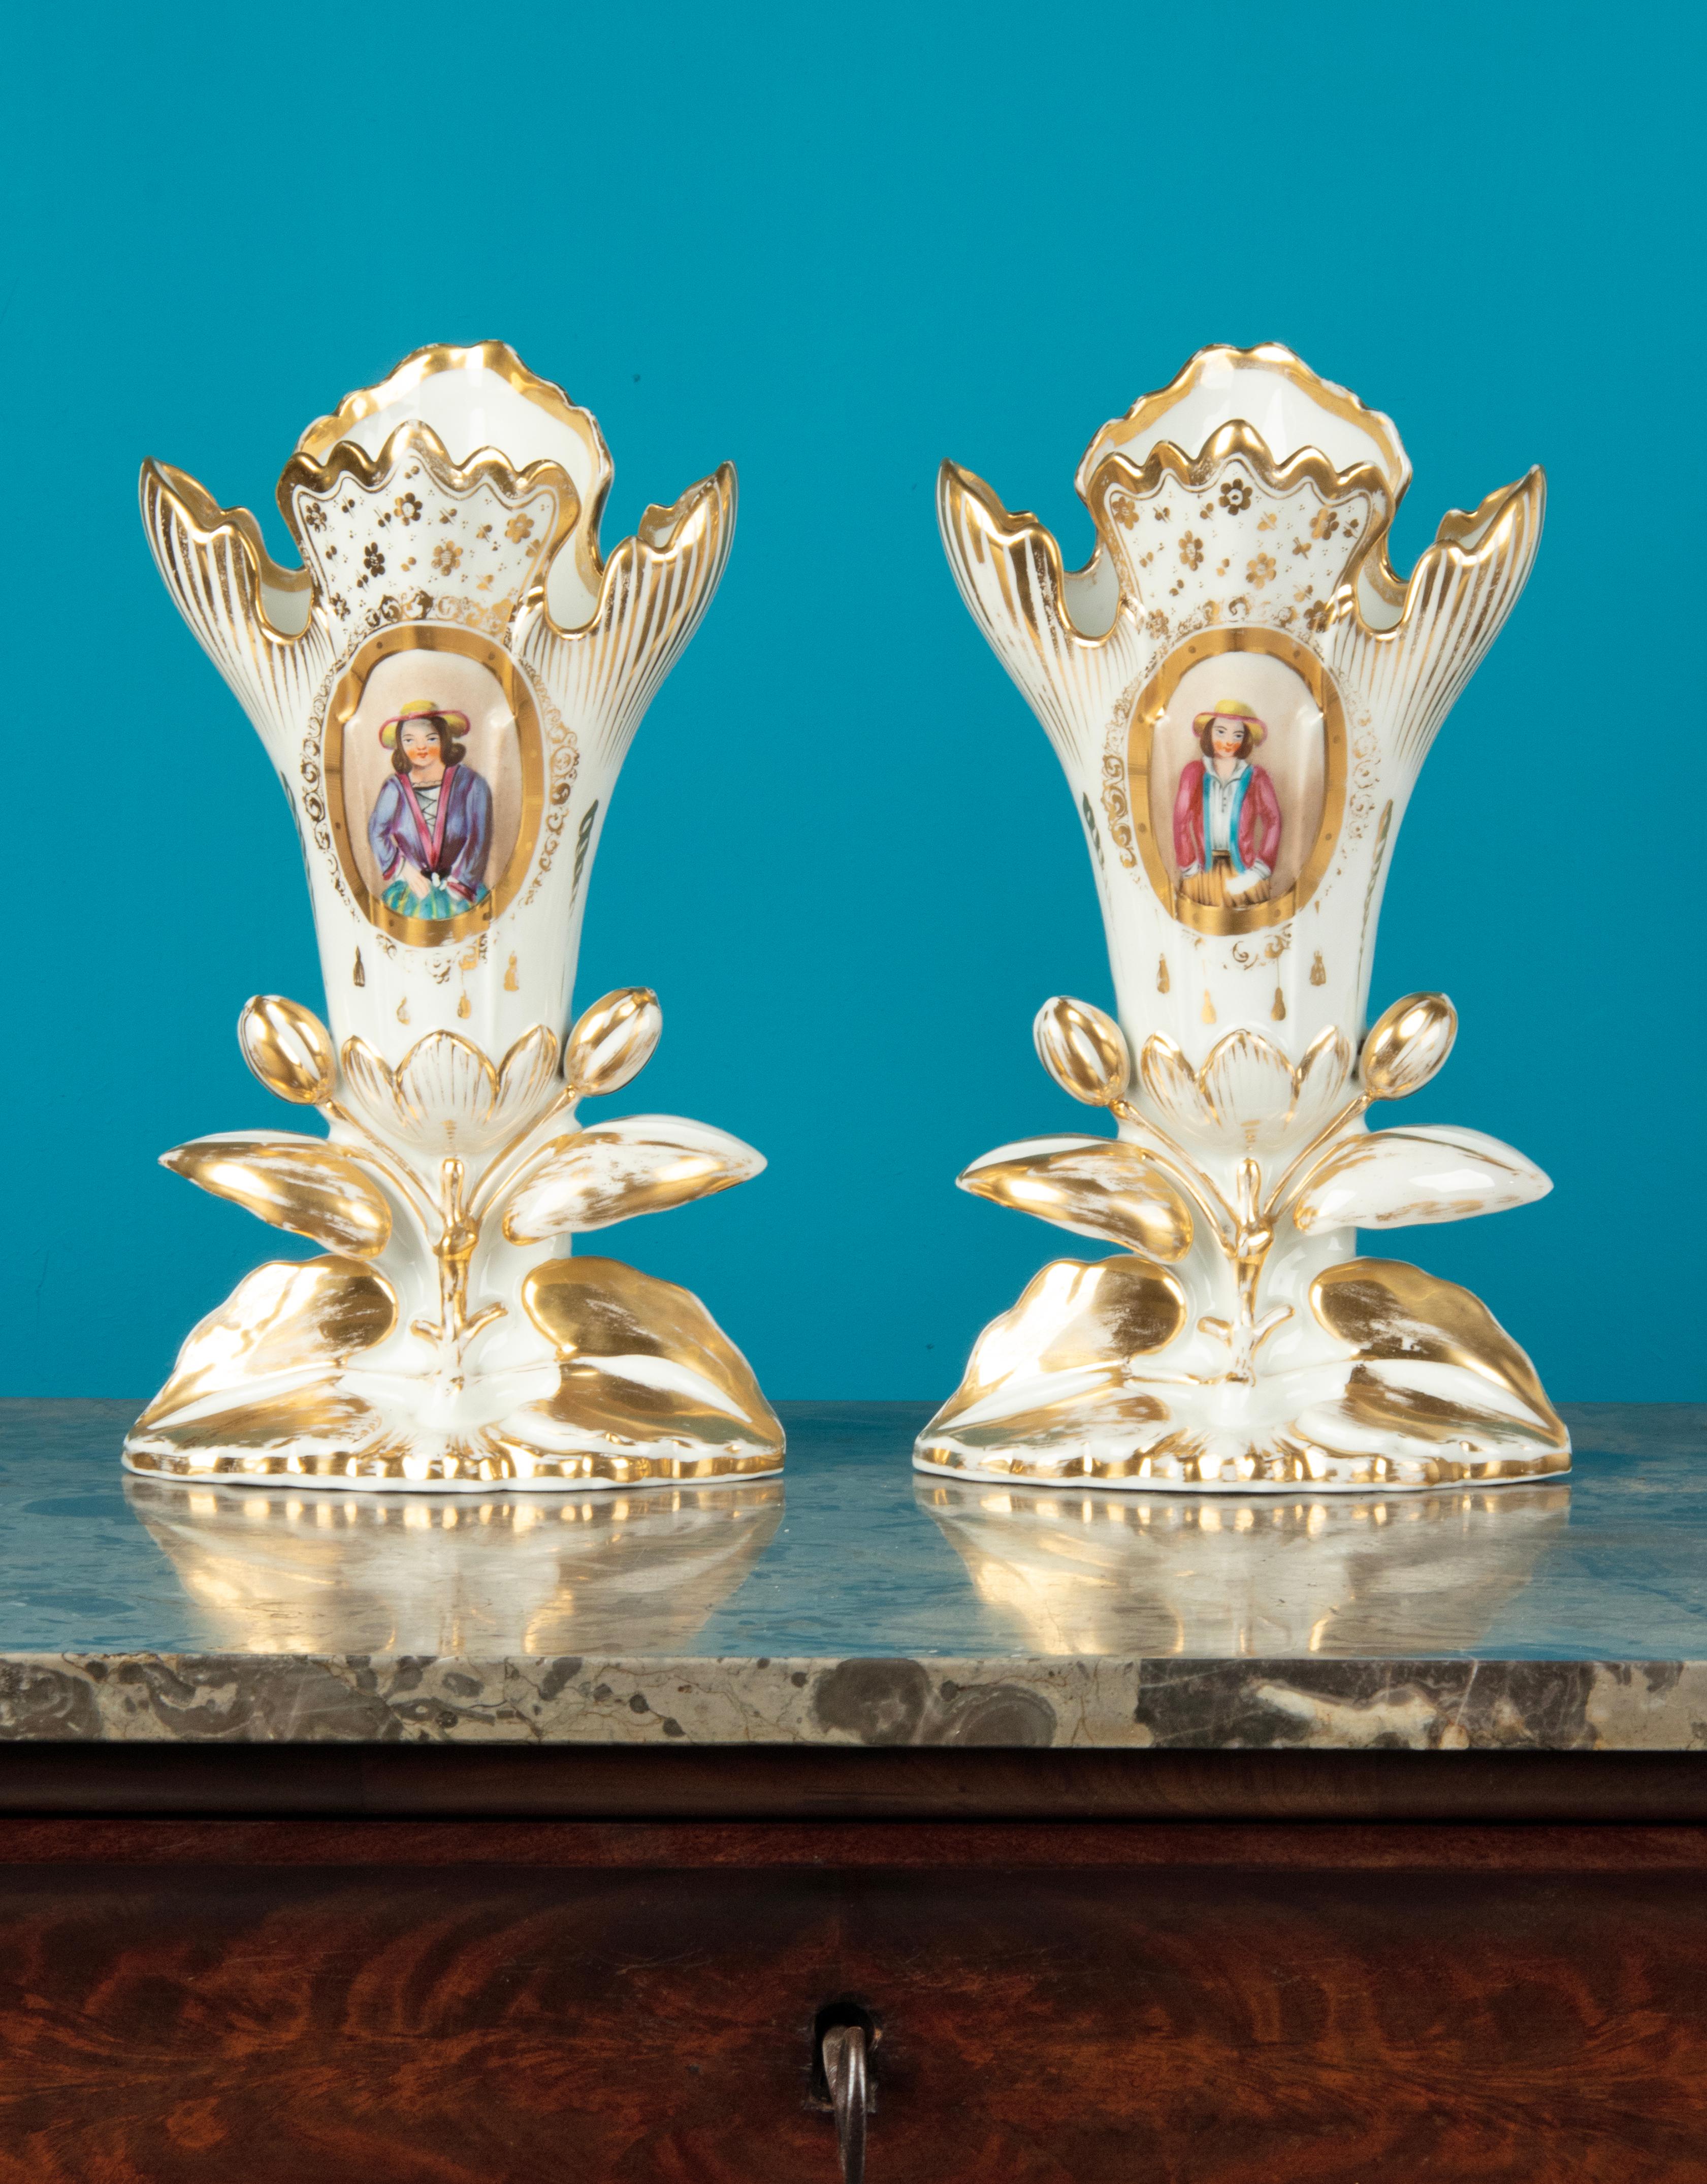 A lovely pair of antique porcelain Vieux Paris vases. Hand painted with portraits of a boy and a girl and gold colored accents. The vases are in good condition. No chips and no hairlines. Light wear on the gold colored accents. The vases date from